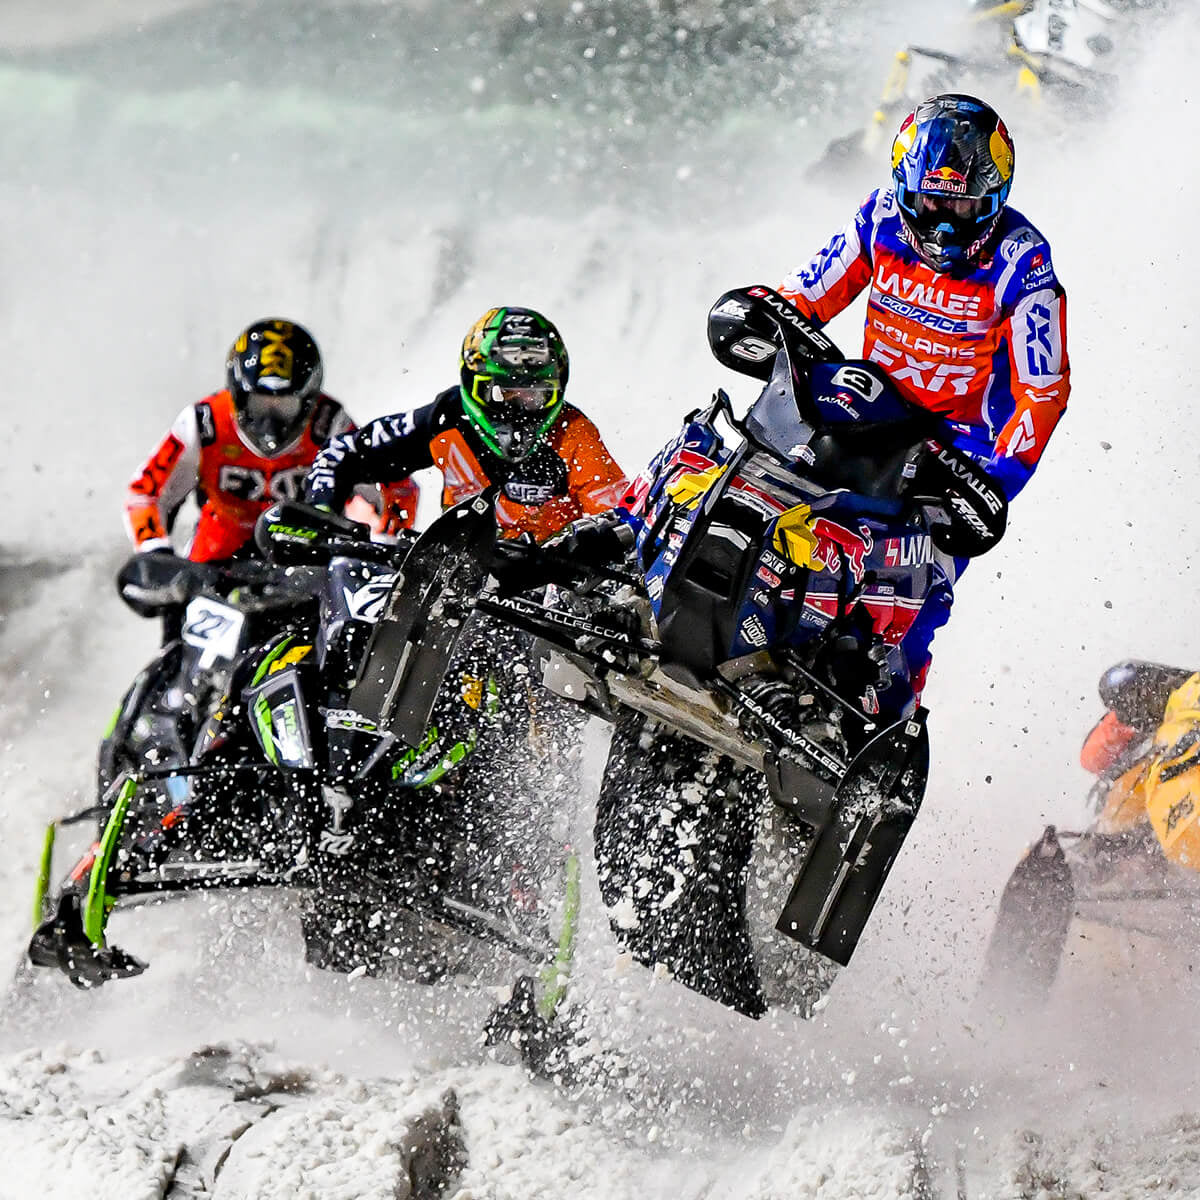 Group of professional Snocross athletes racing snowmobiles at ISOC Amsoil National Snocross